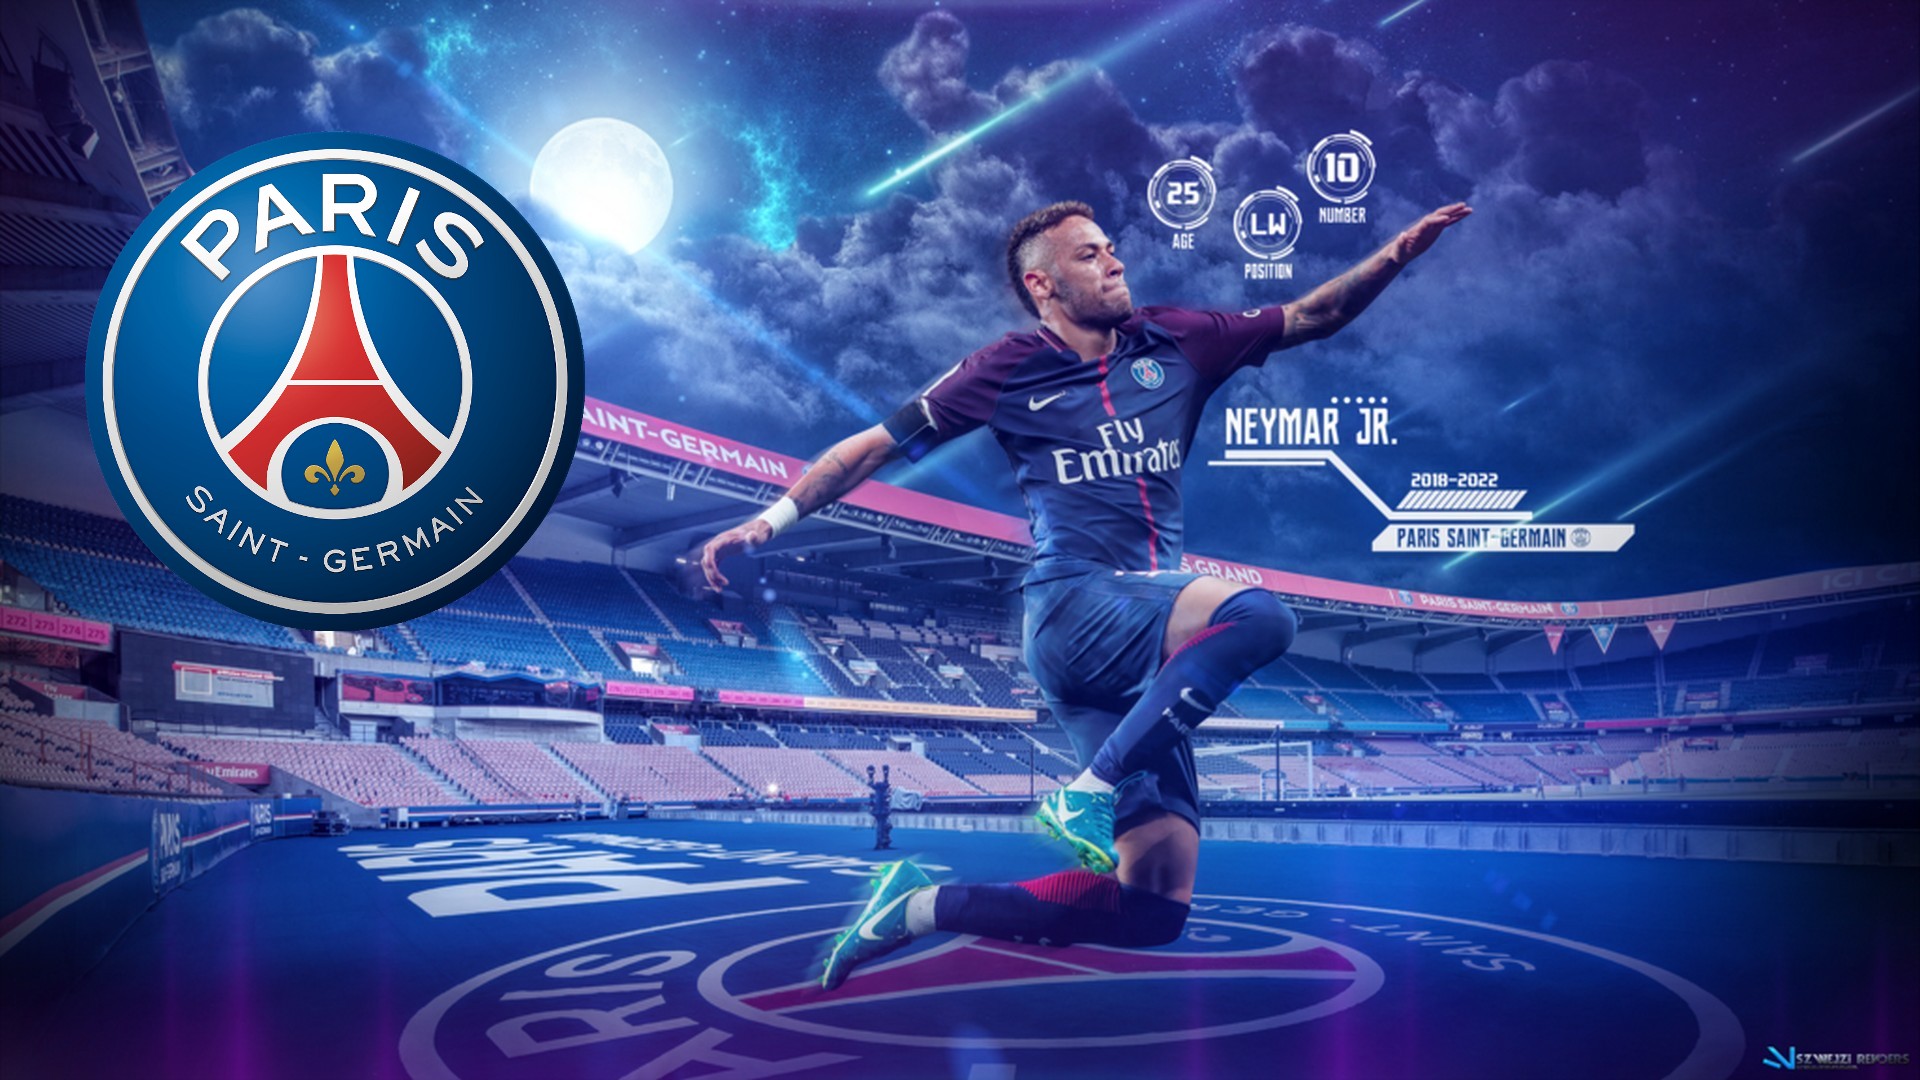 Wallpaper Desktop Neymar PSG HD With Resolution 1920X1080 pixel. You can make this wallpaper for your Mac or Windows Desktop Background, iPhone, Android or Tablet and another Smartphone device for free